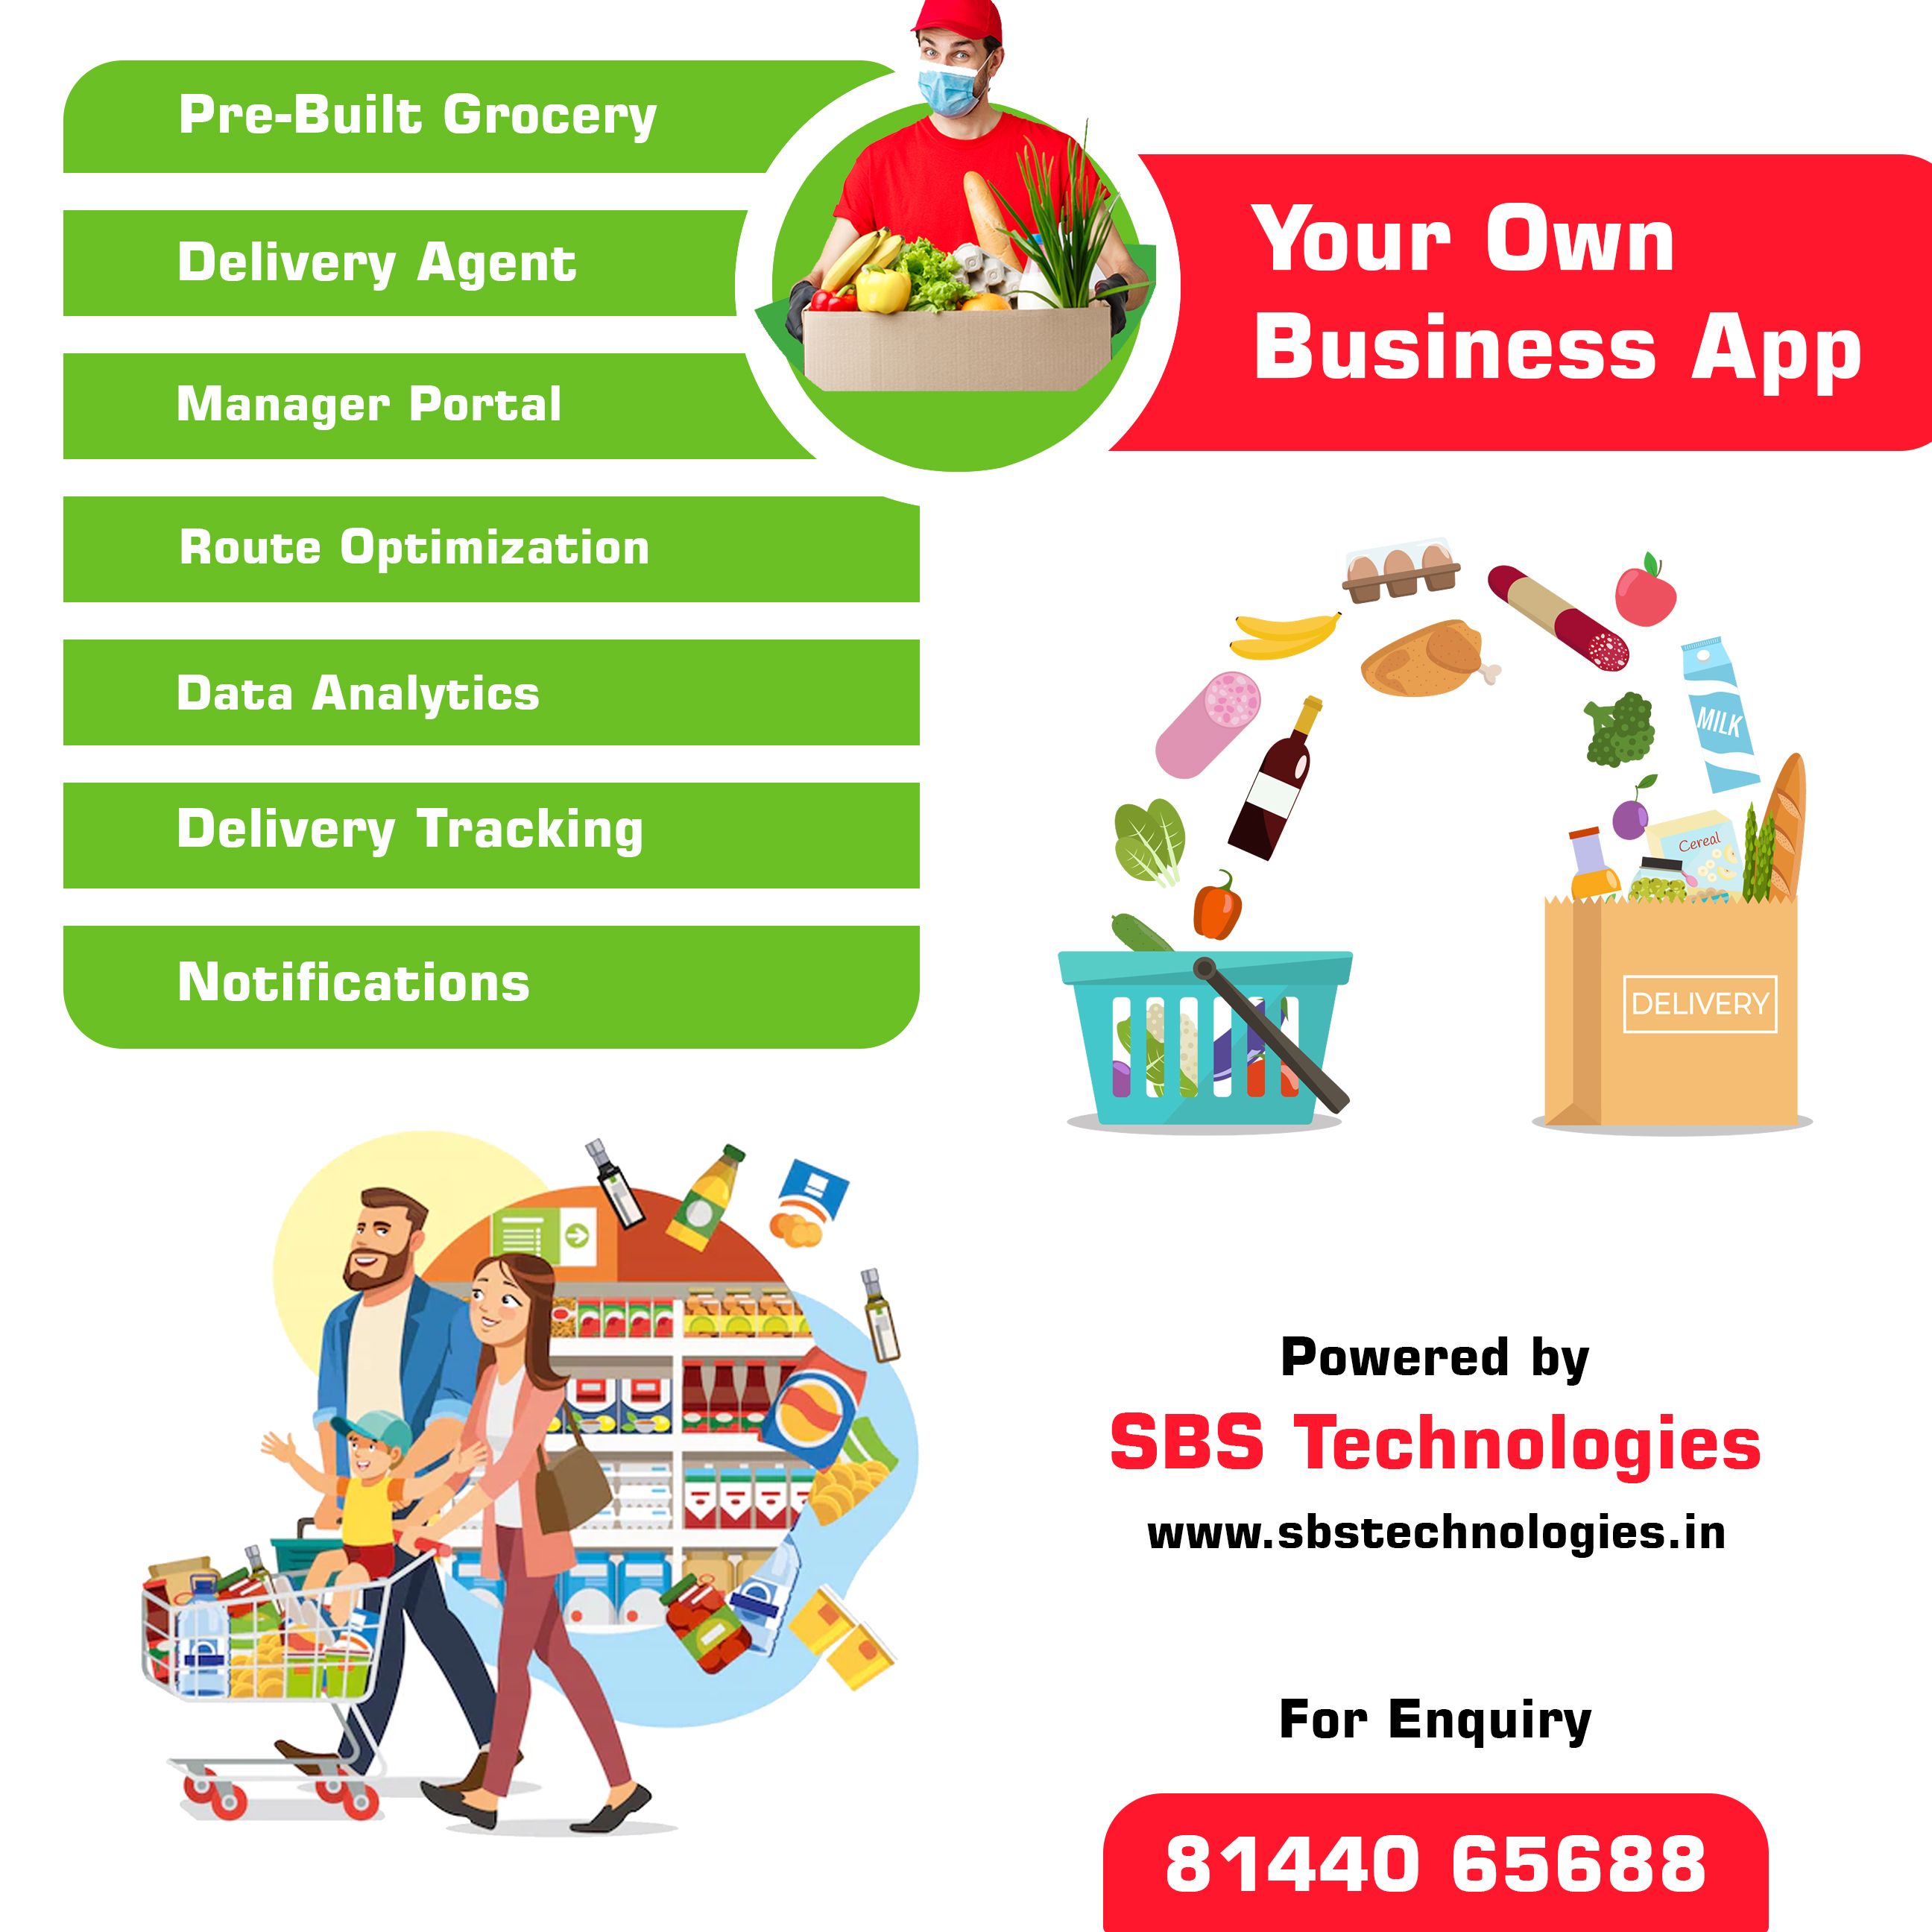 YOUR OWN BUSINESS APP